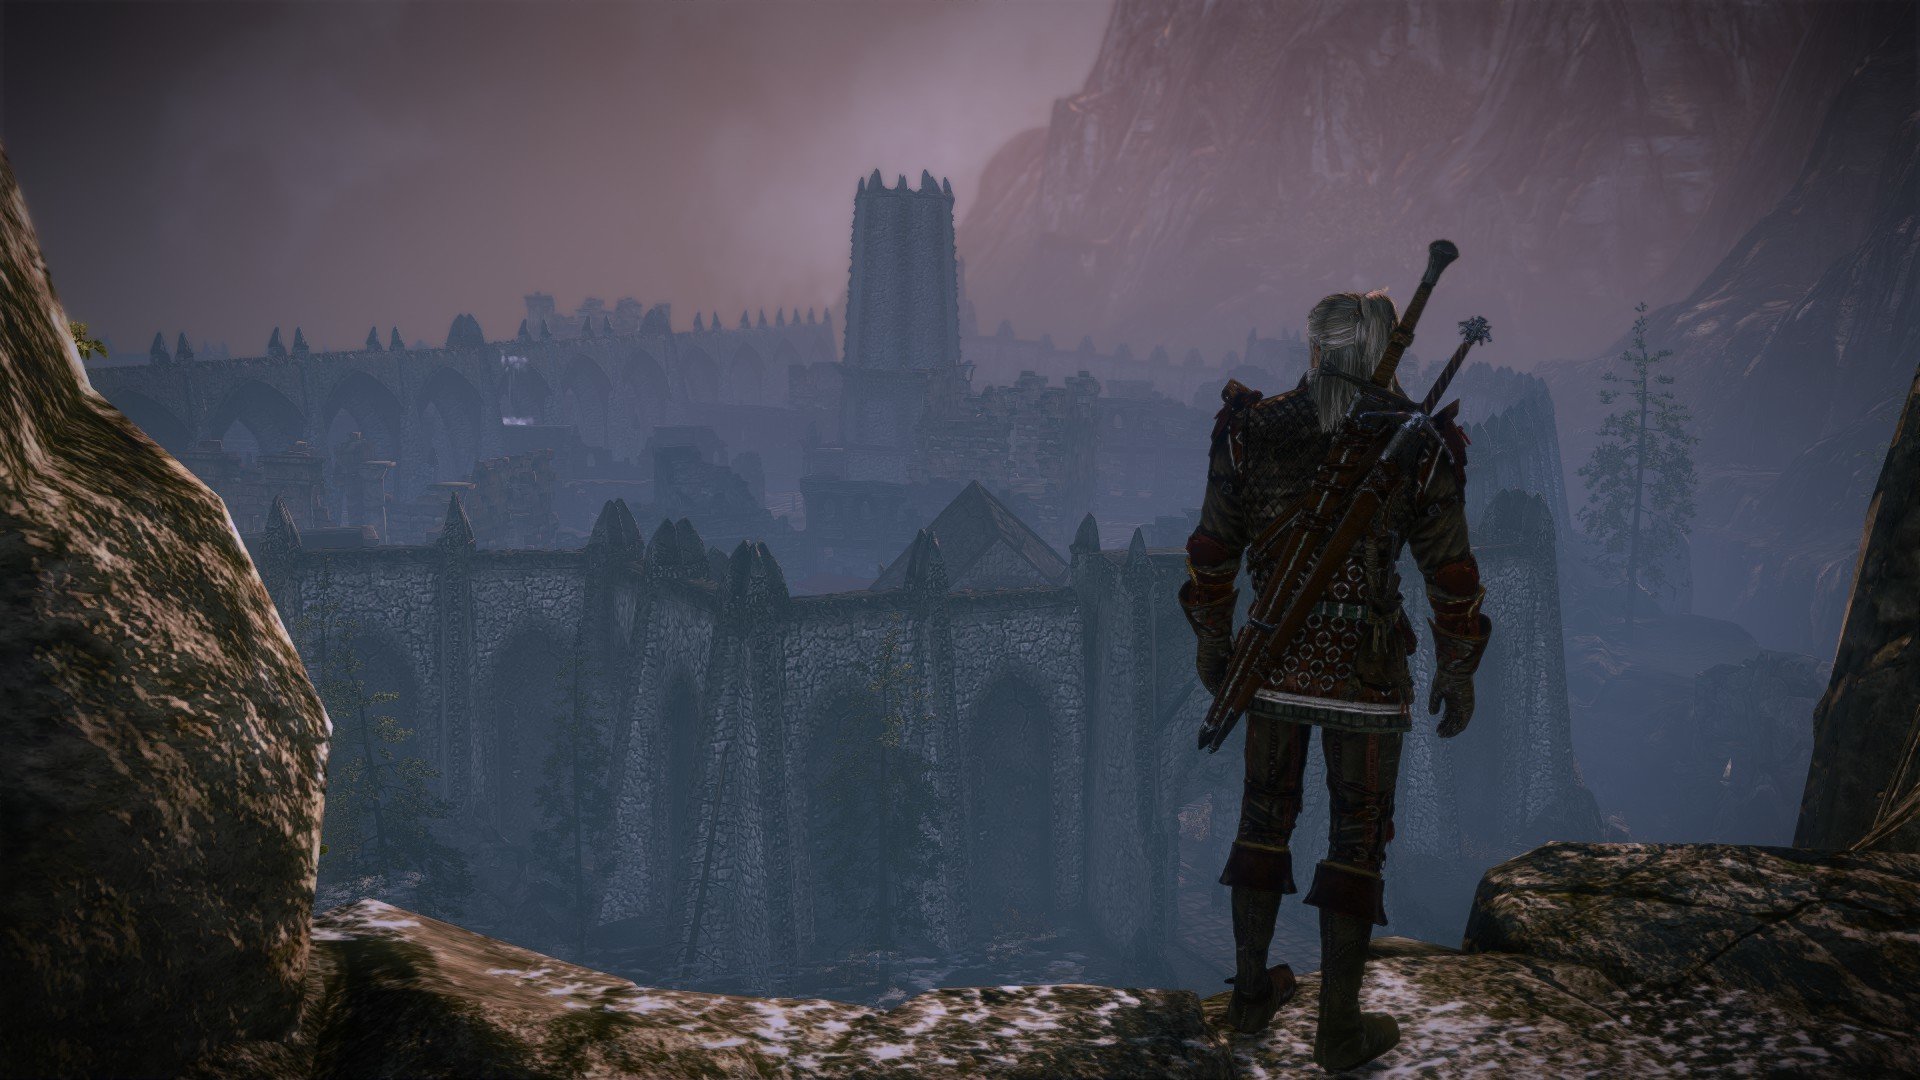 Download full hd 1080p The Witcher 2: Assassins Of Kings desktop background ID:52376 for free